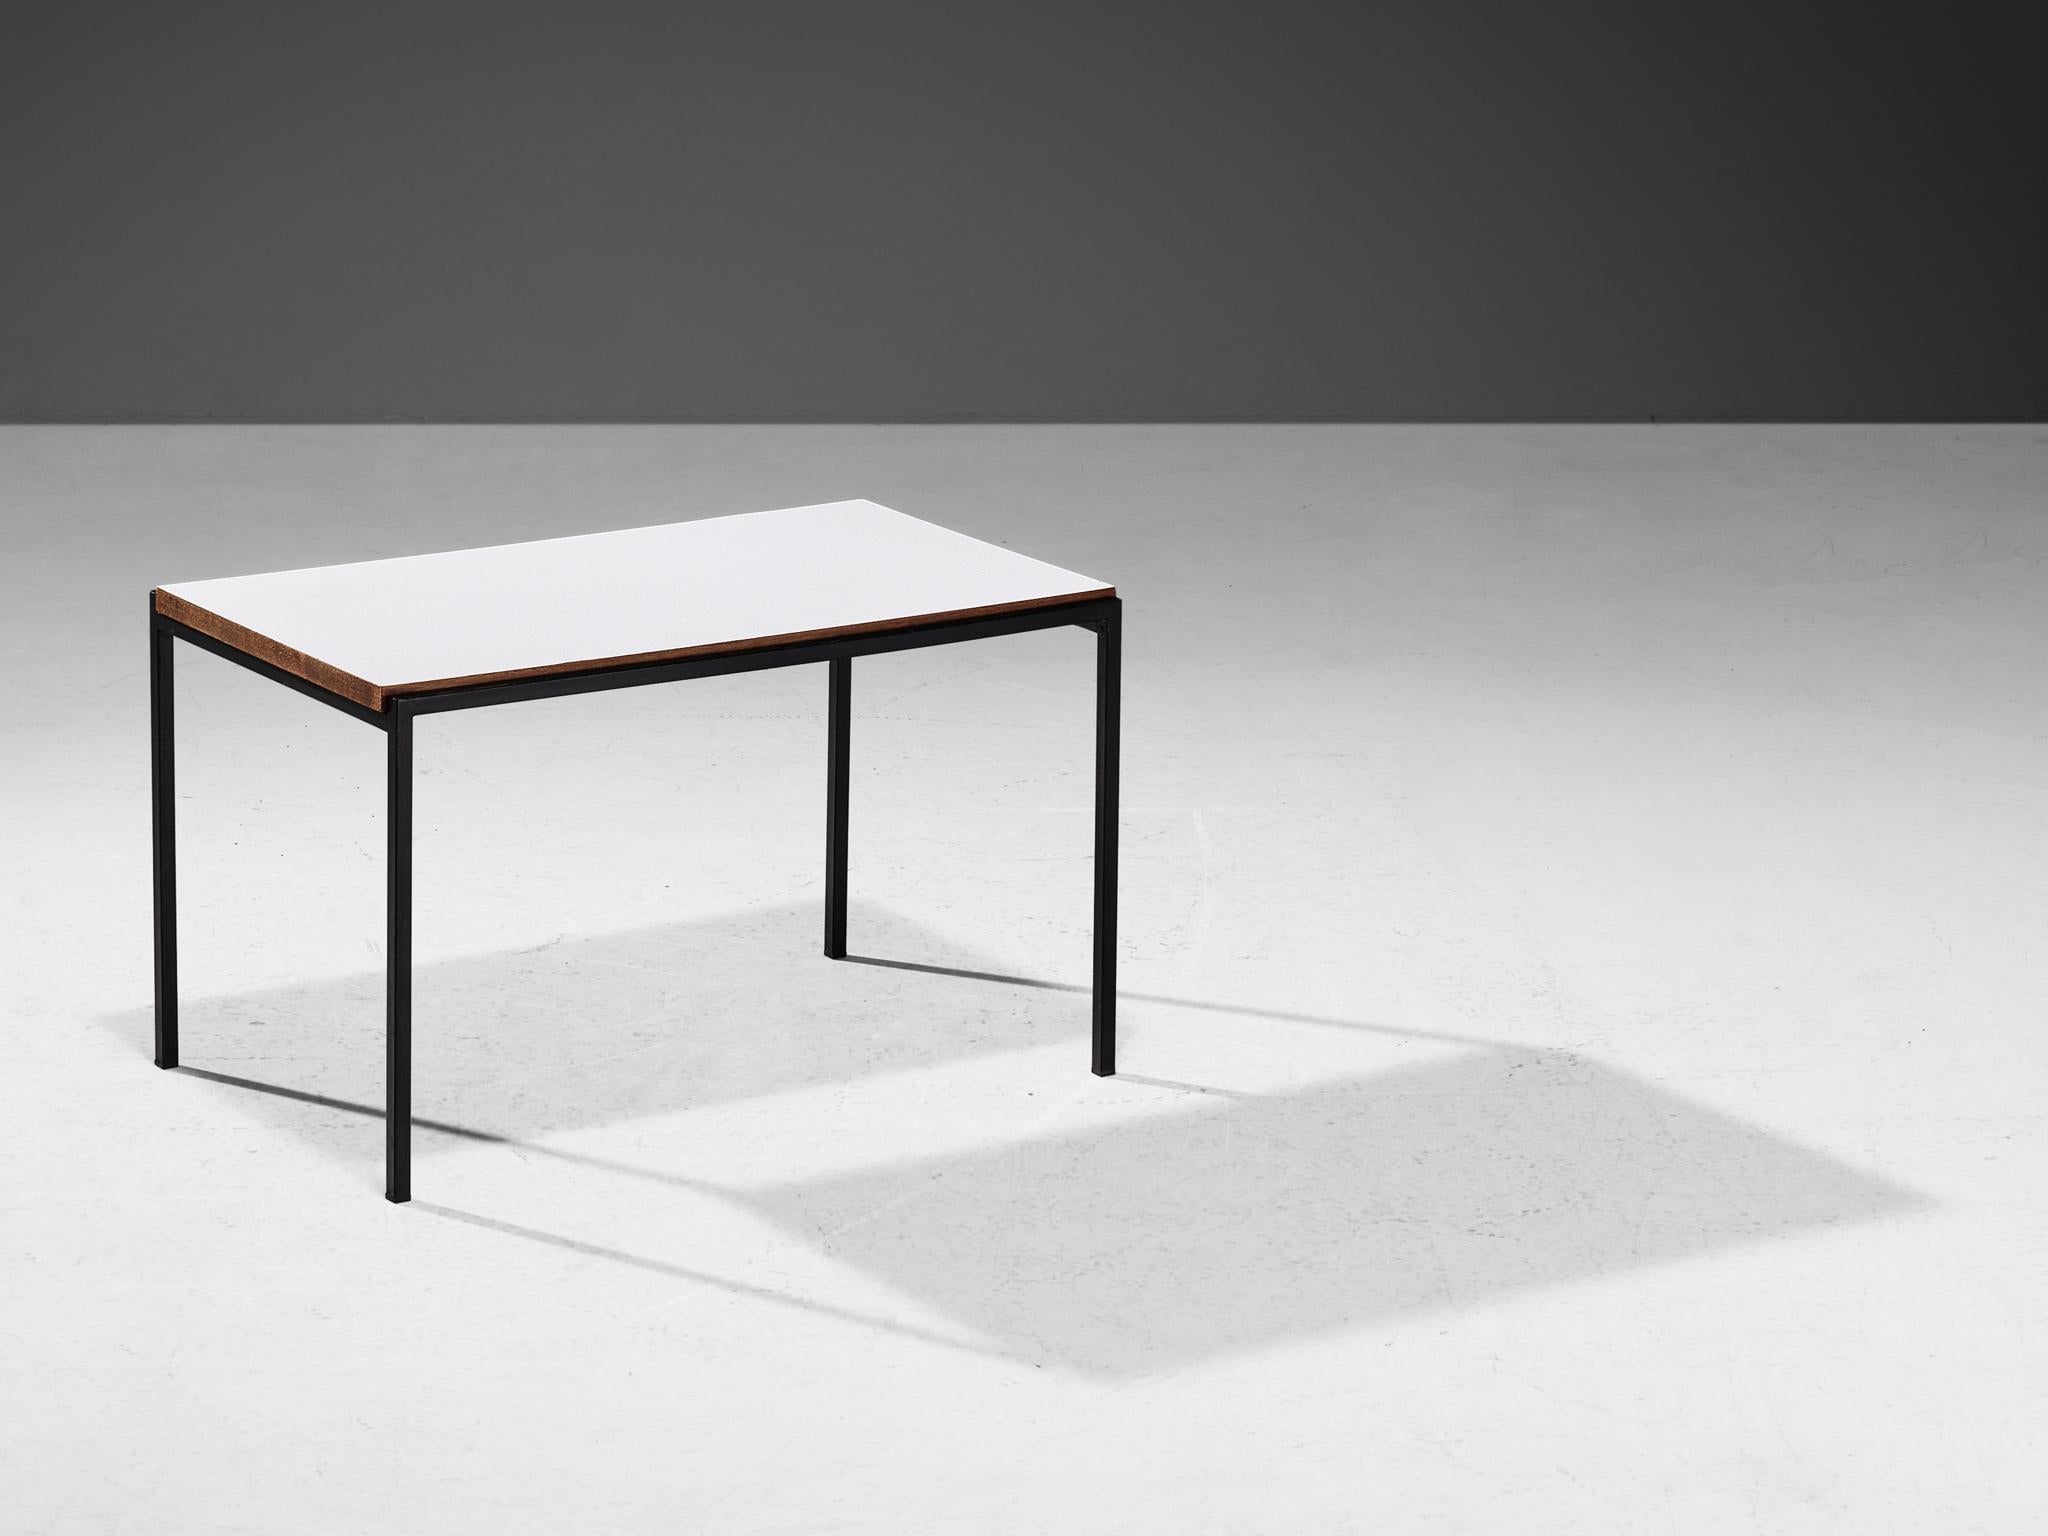 Coffee table, Dutch, metal en wood, 1960s.

A simplistic Dutch side or coffee table consisting of a black metal frame with a white lacquered wooden top. The wooden top is partially levitating in the metal frame, which makes it interesting and